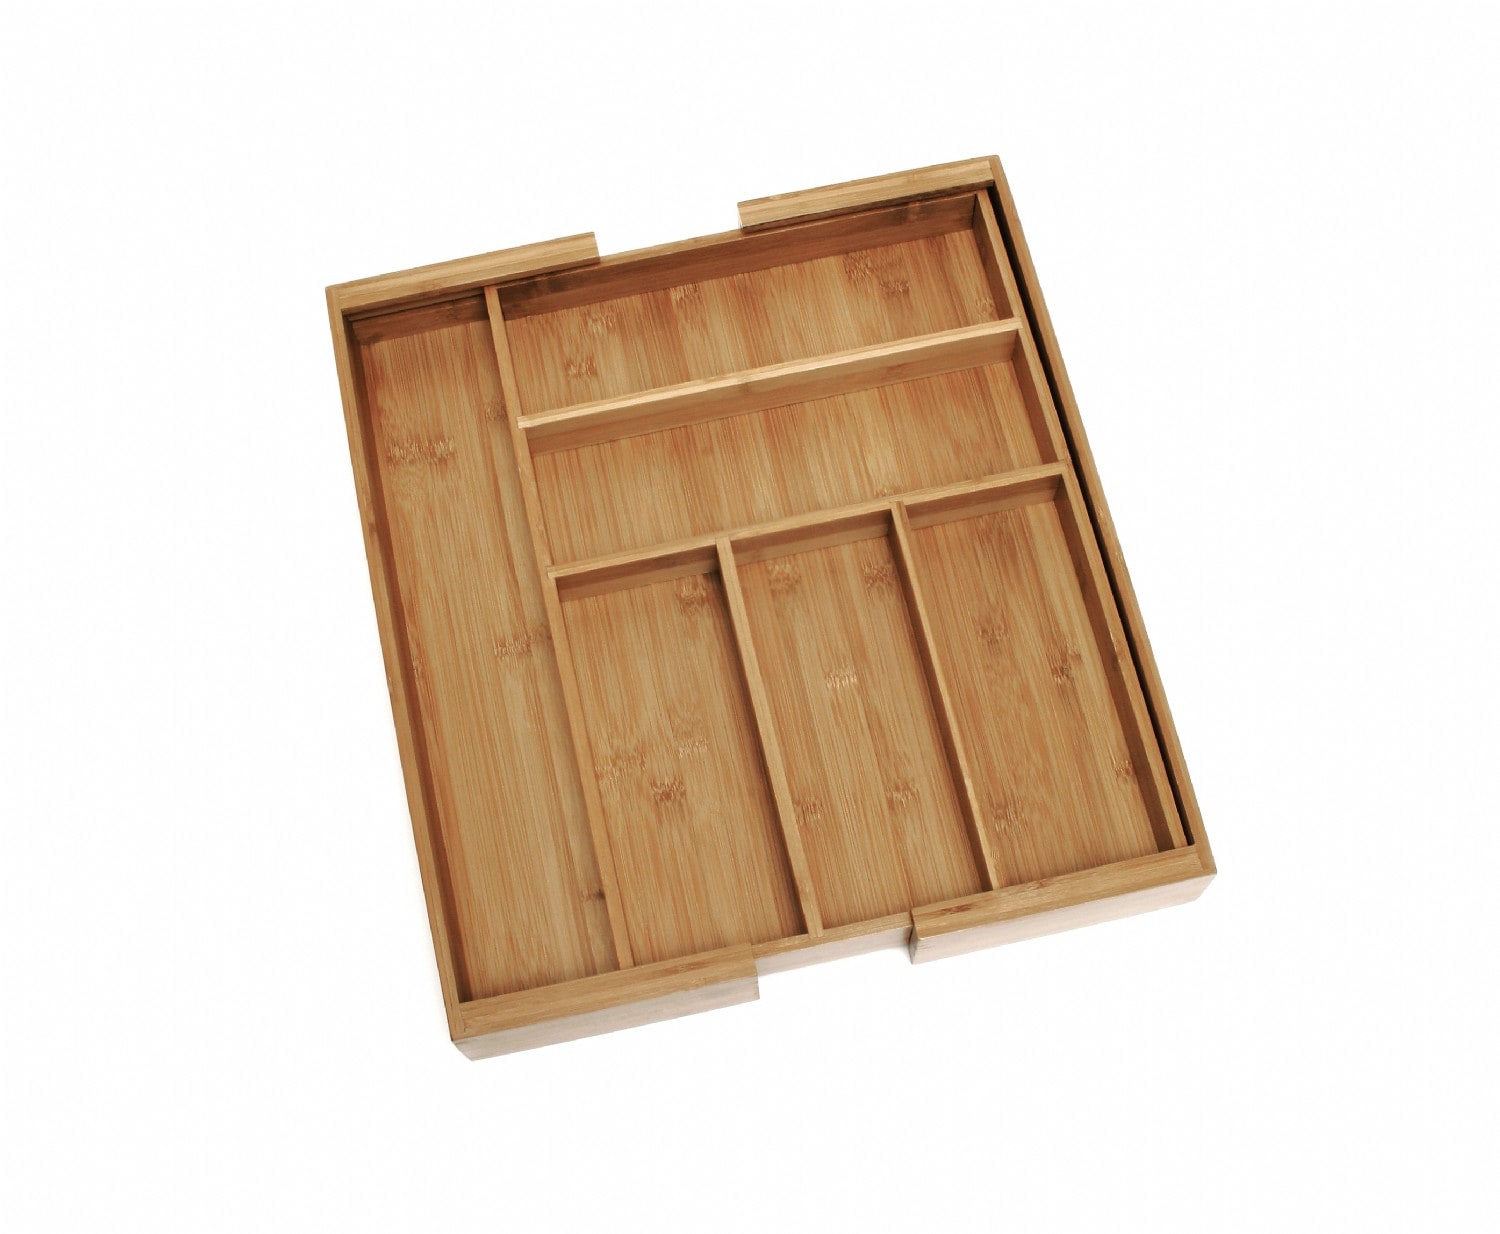 Simplify 2.36 in. x 0.59 in. x 16.93 in. Wood Bamboo Closet Drawer  Organizer 3753-NATURAL - The Home Depot